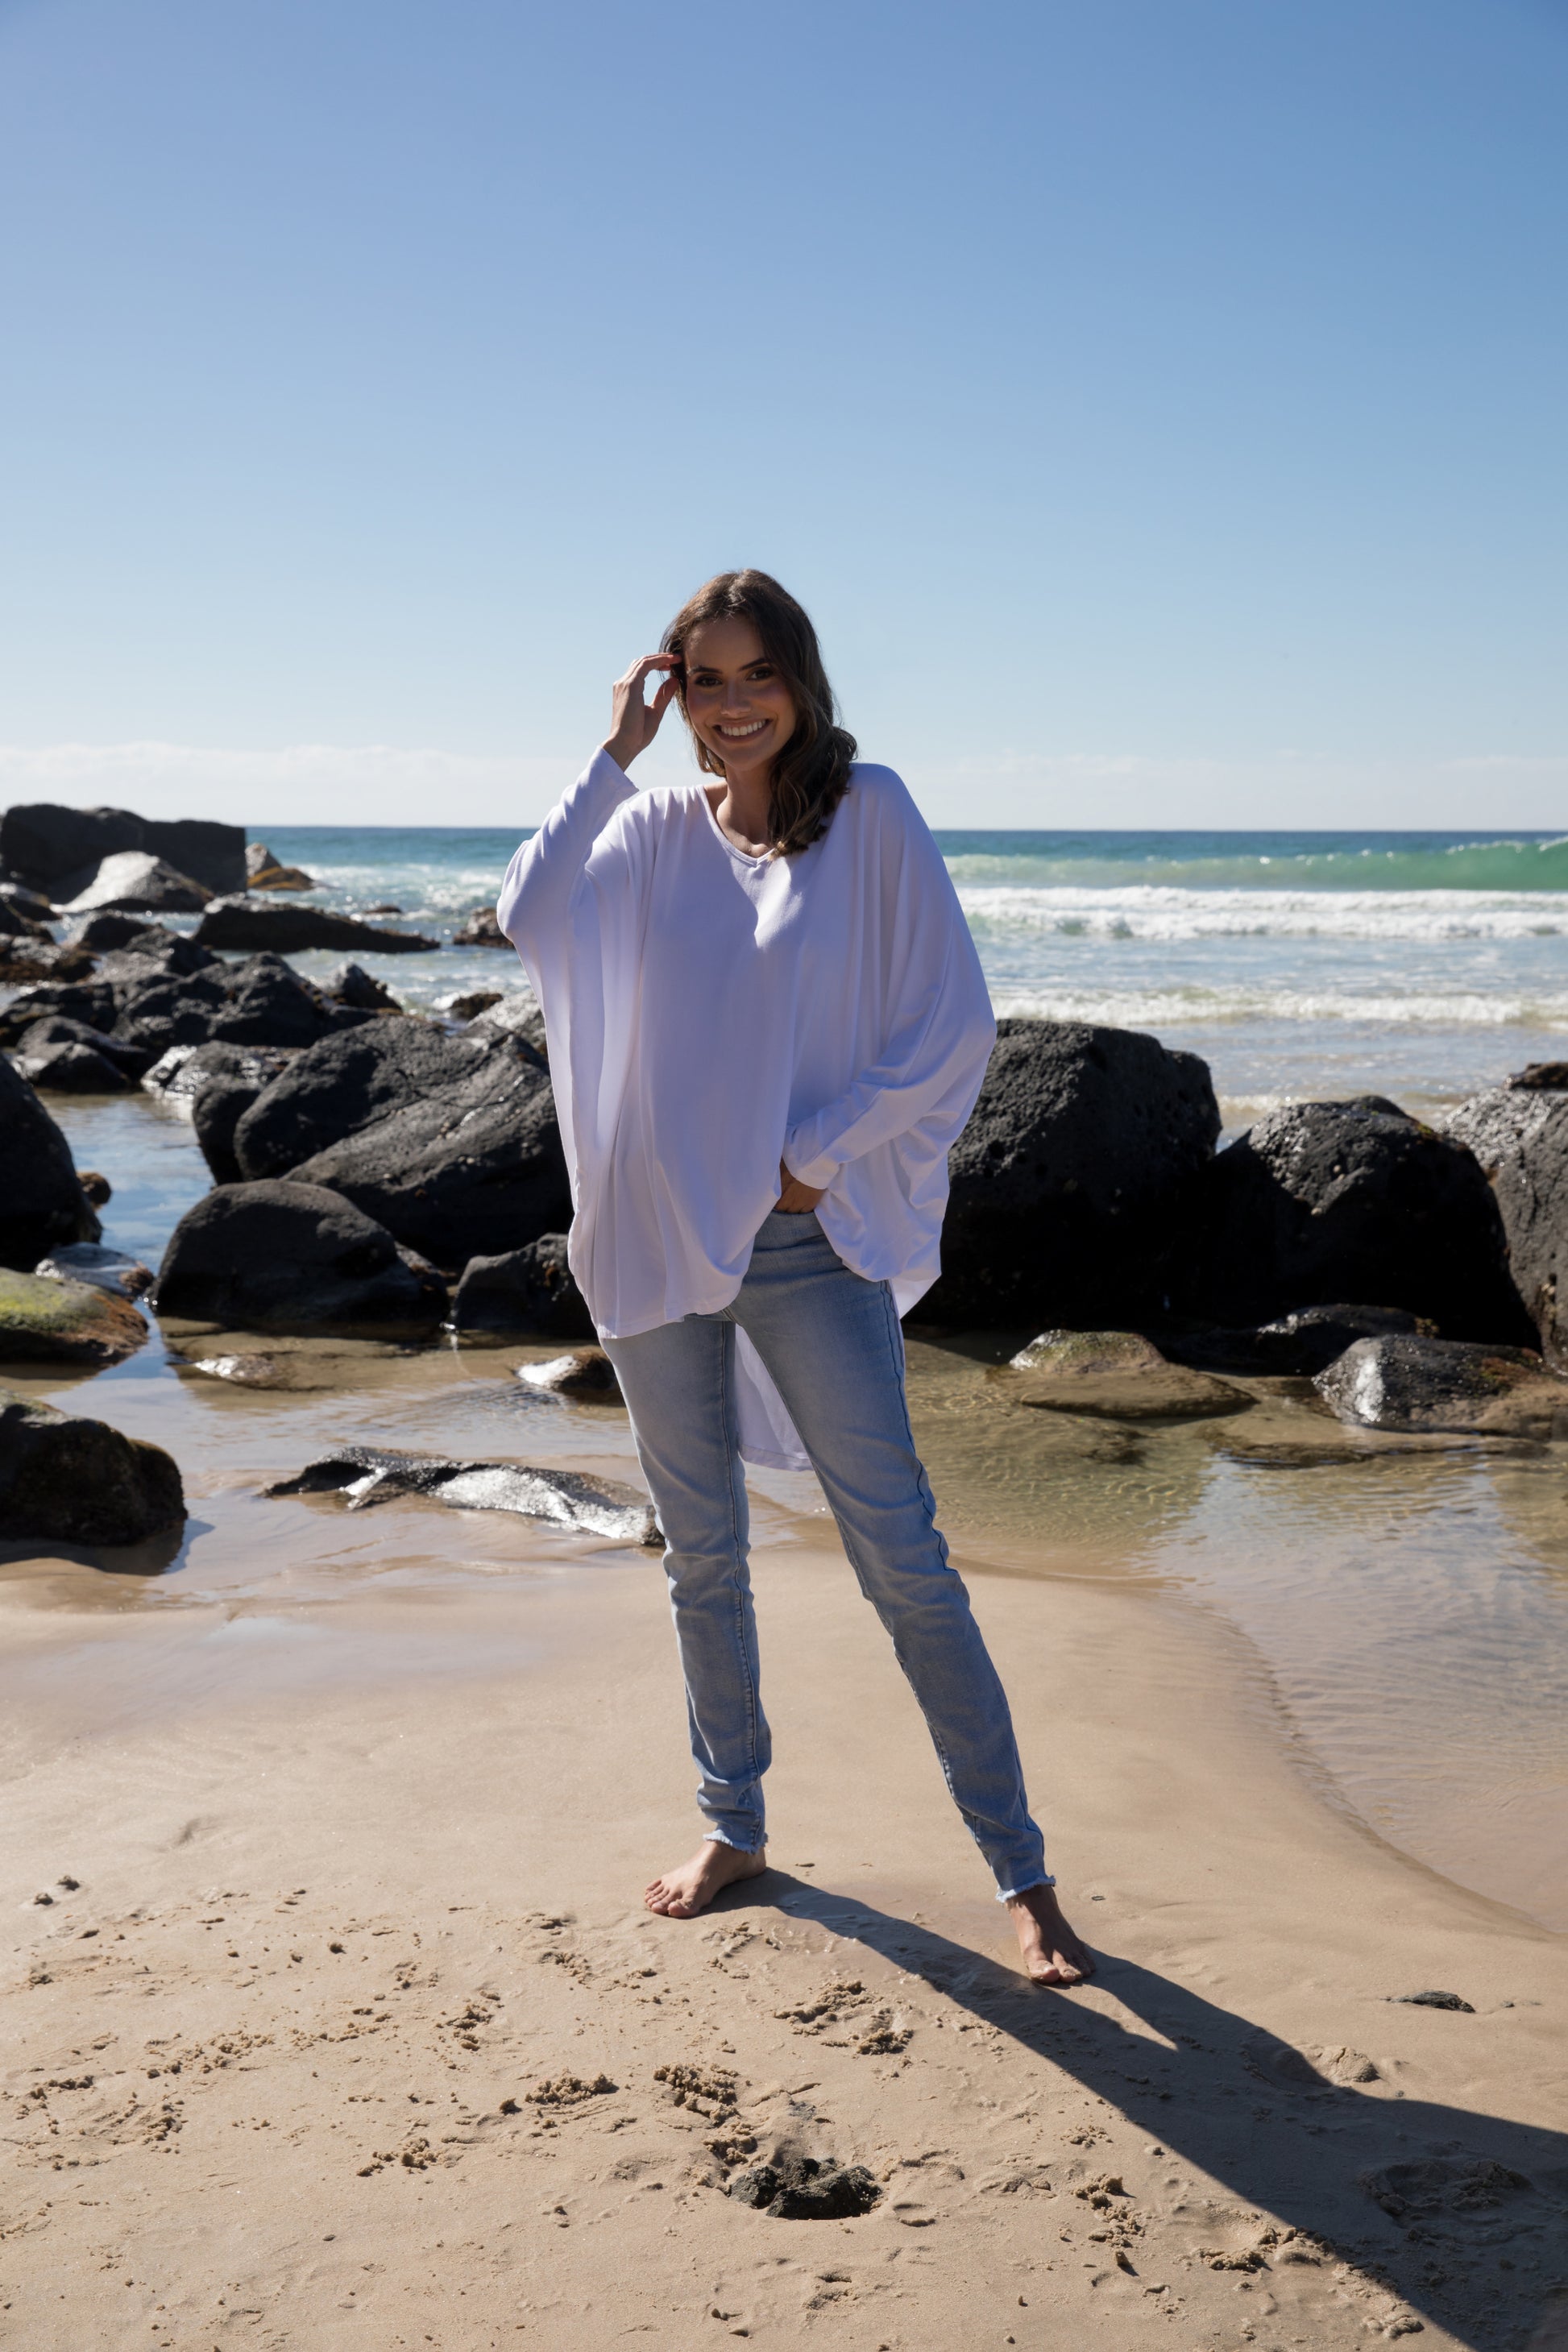 Plus-Sized White Top | PQ Collection | Long Sleeve Hi-Low Miracle Top